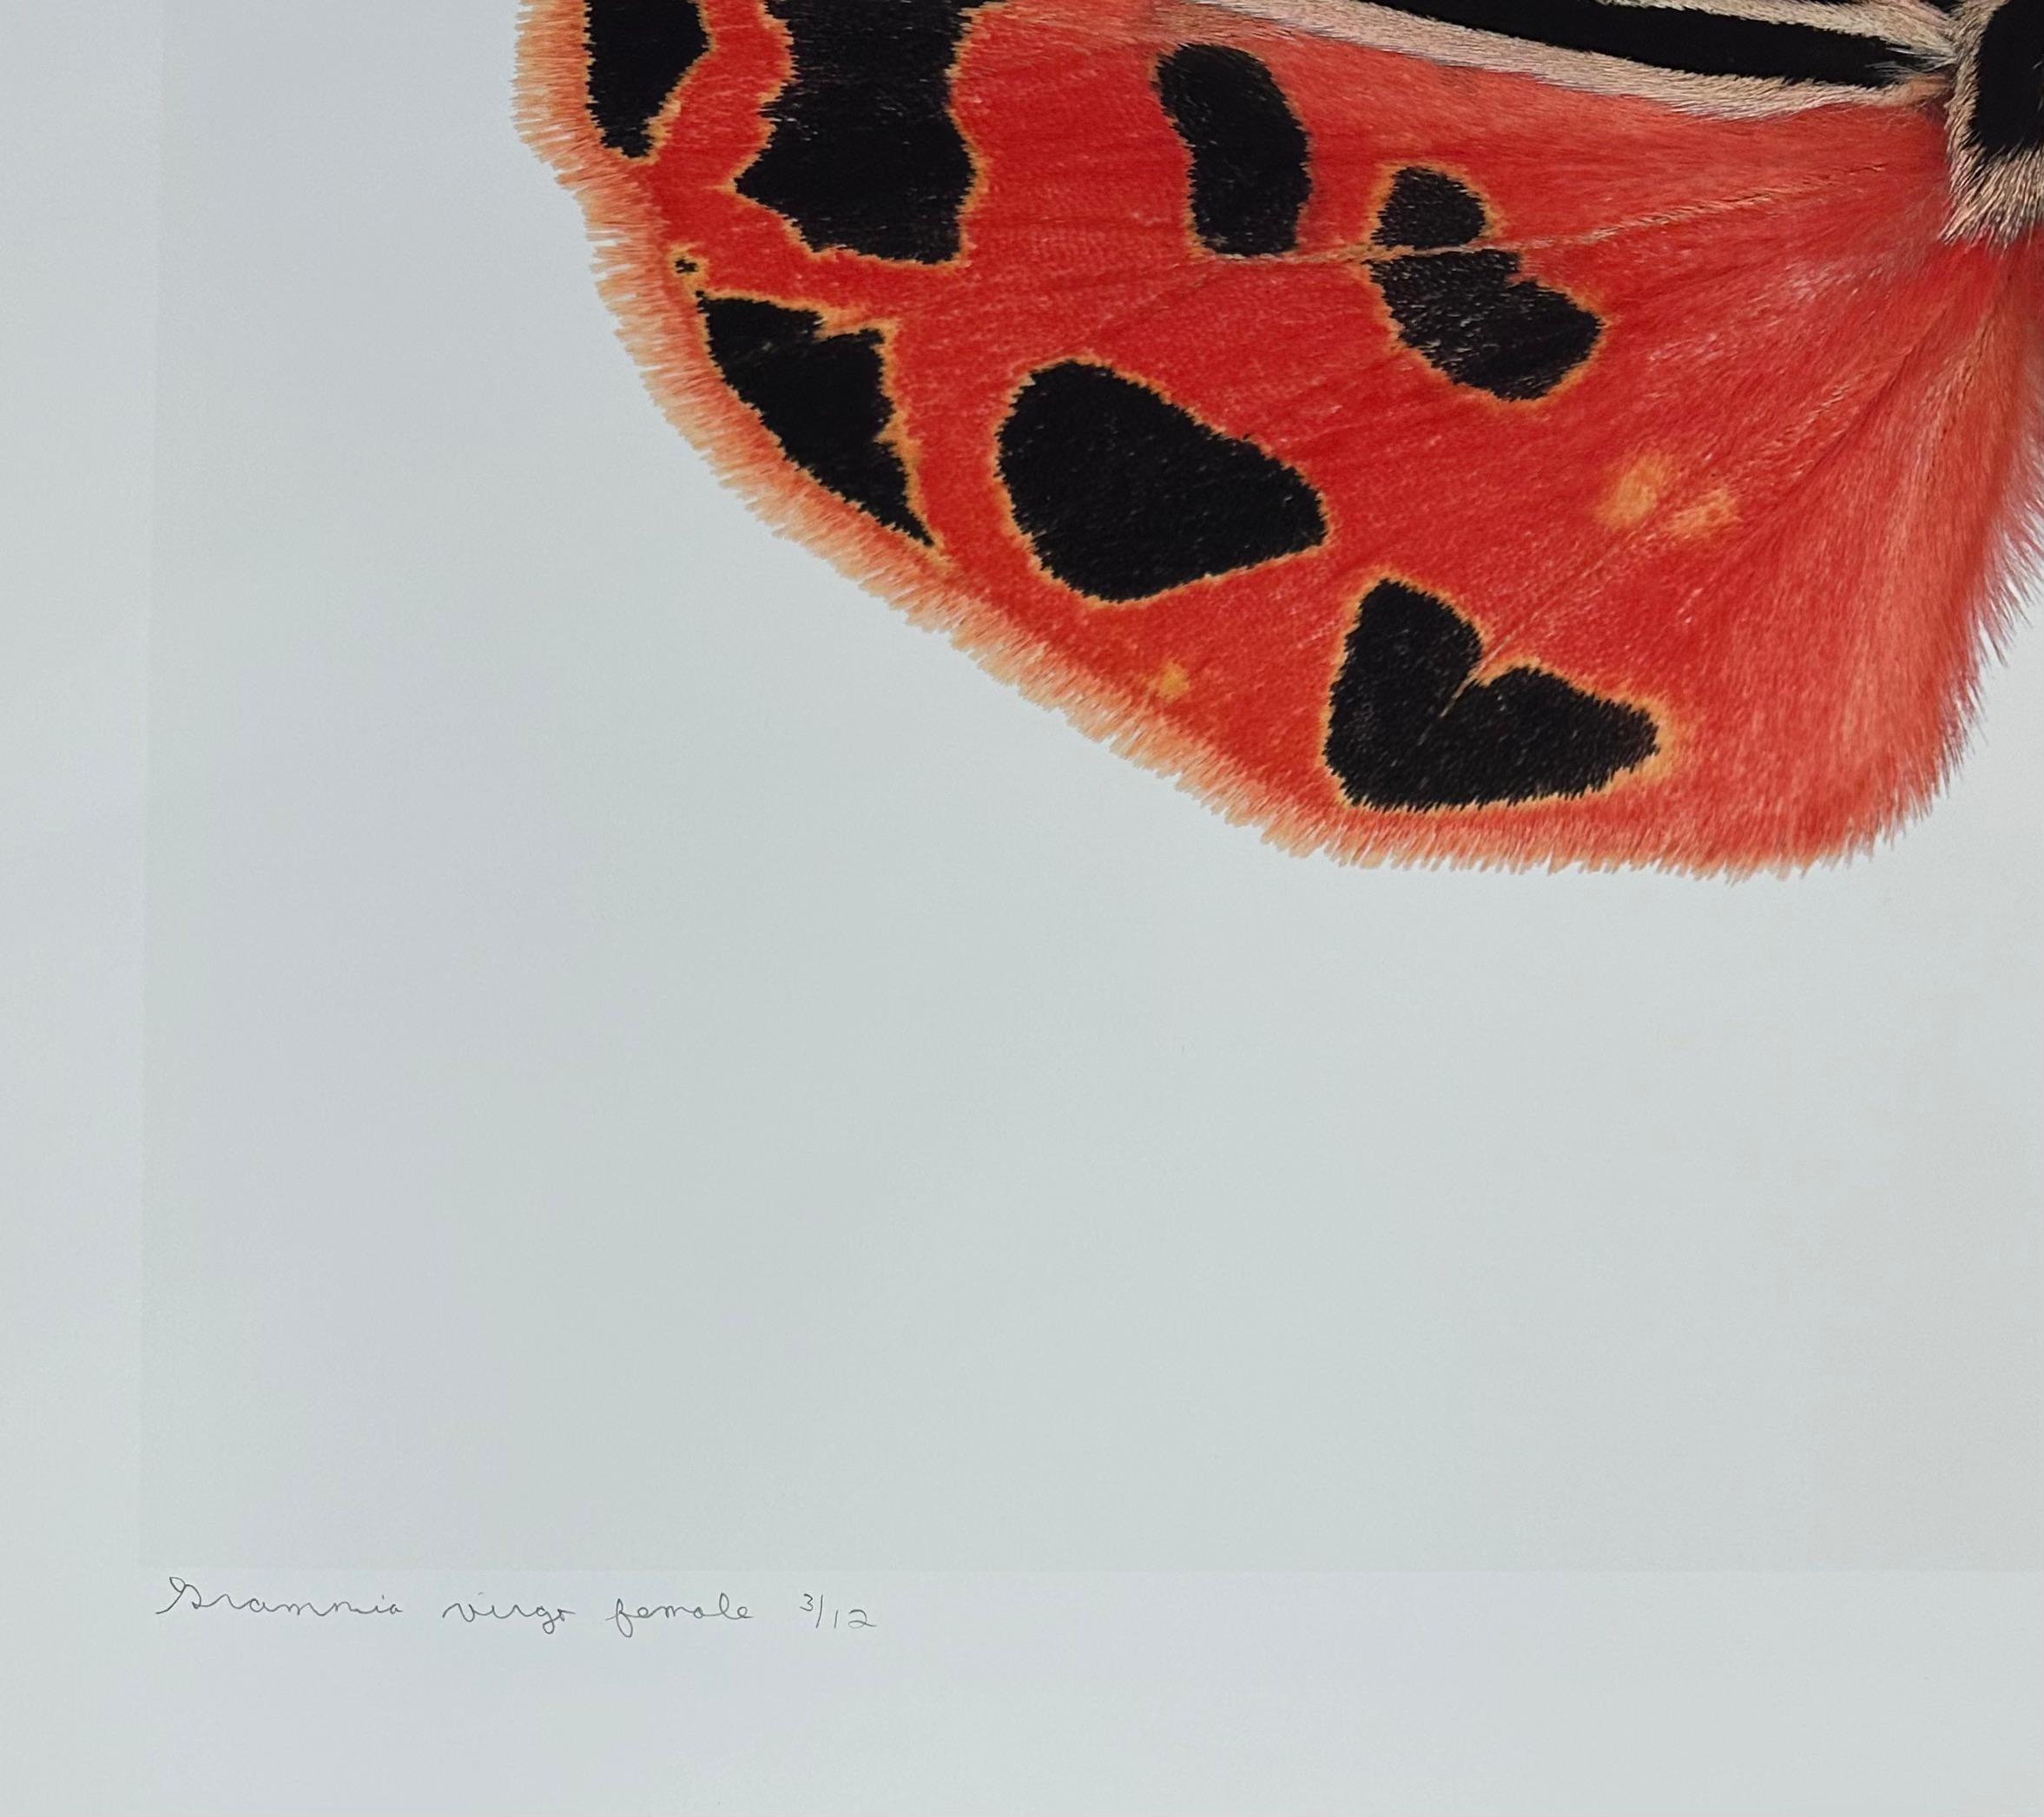 Grammia Virgo Female, Coral Red, Black Peach Moth Insect Wings Nature Photograph For Sale 6